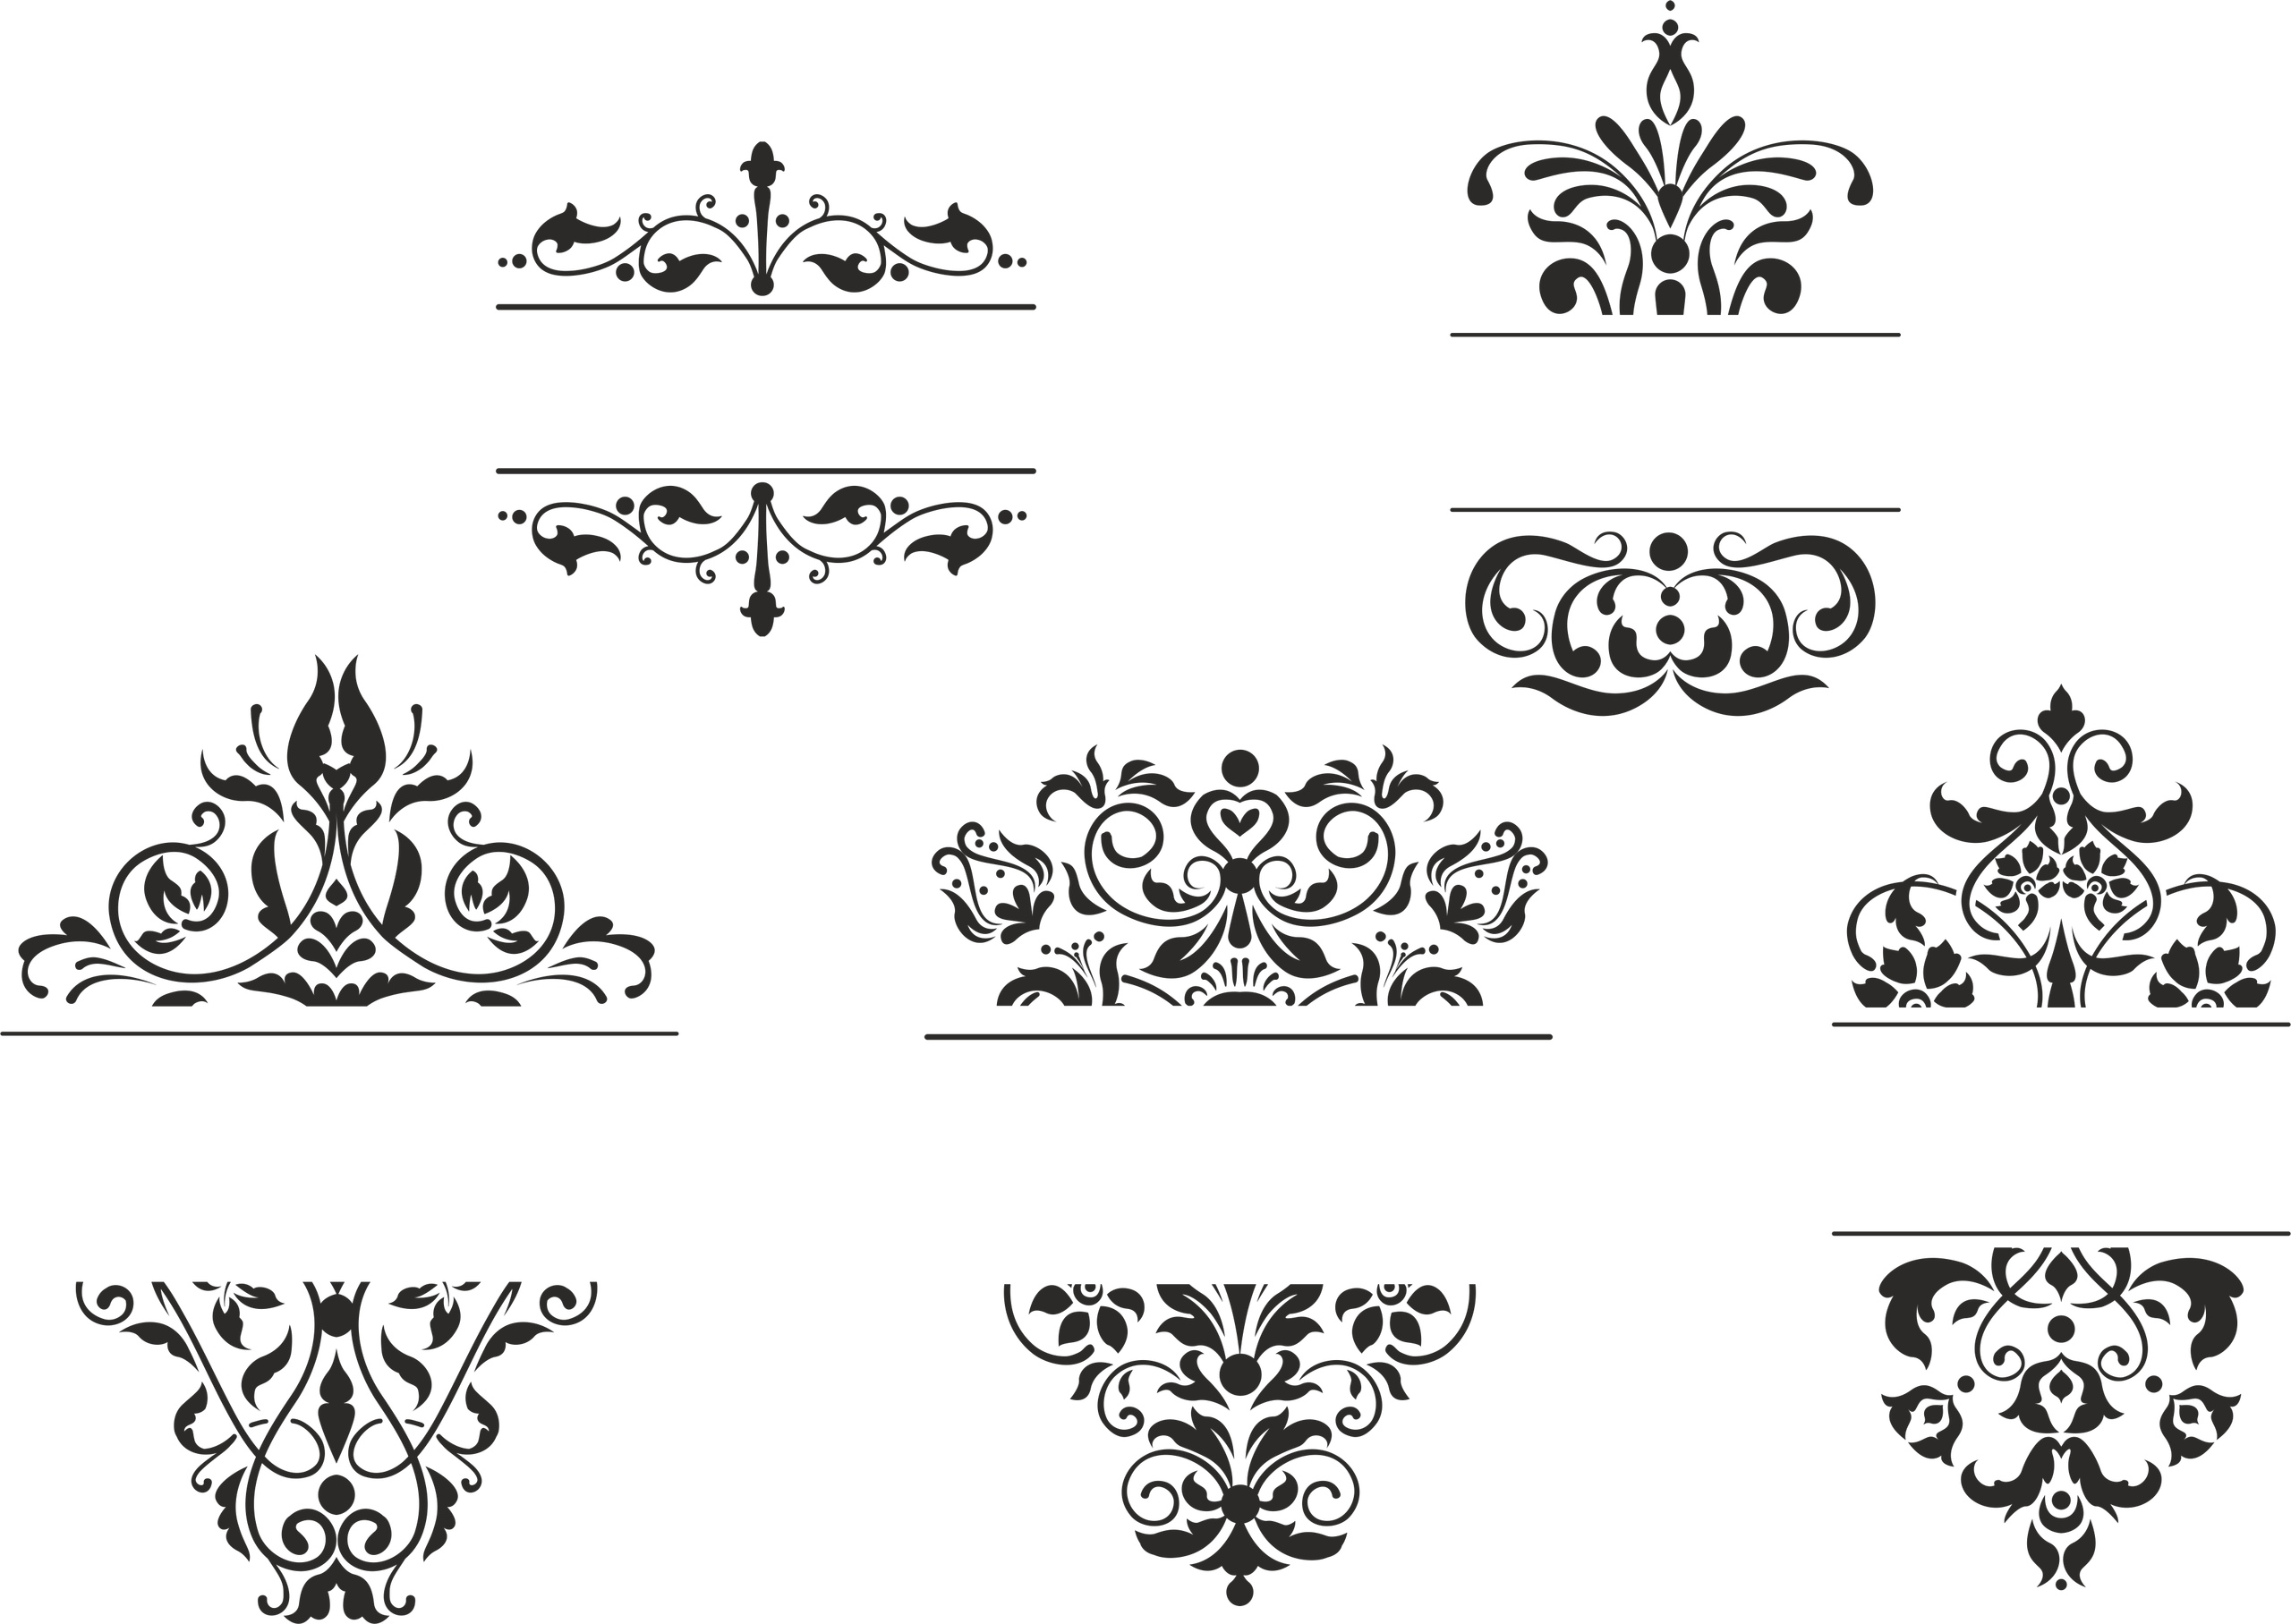 Ornament Frames Set Free Vector cdr Download - 3axis.co